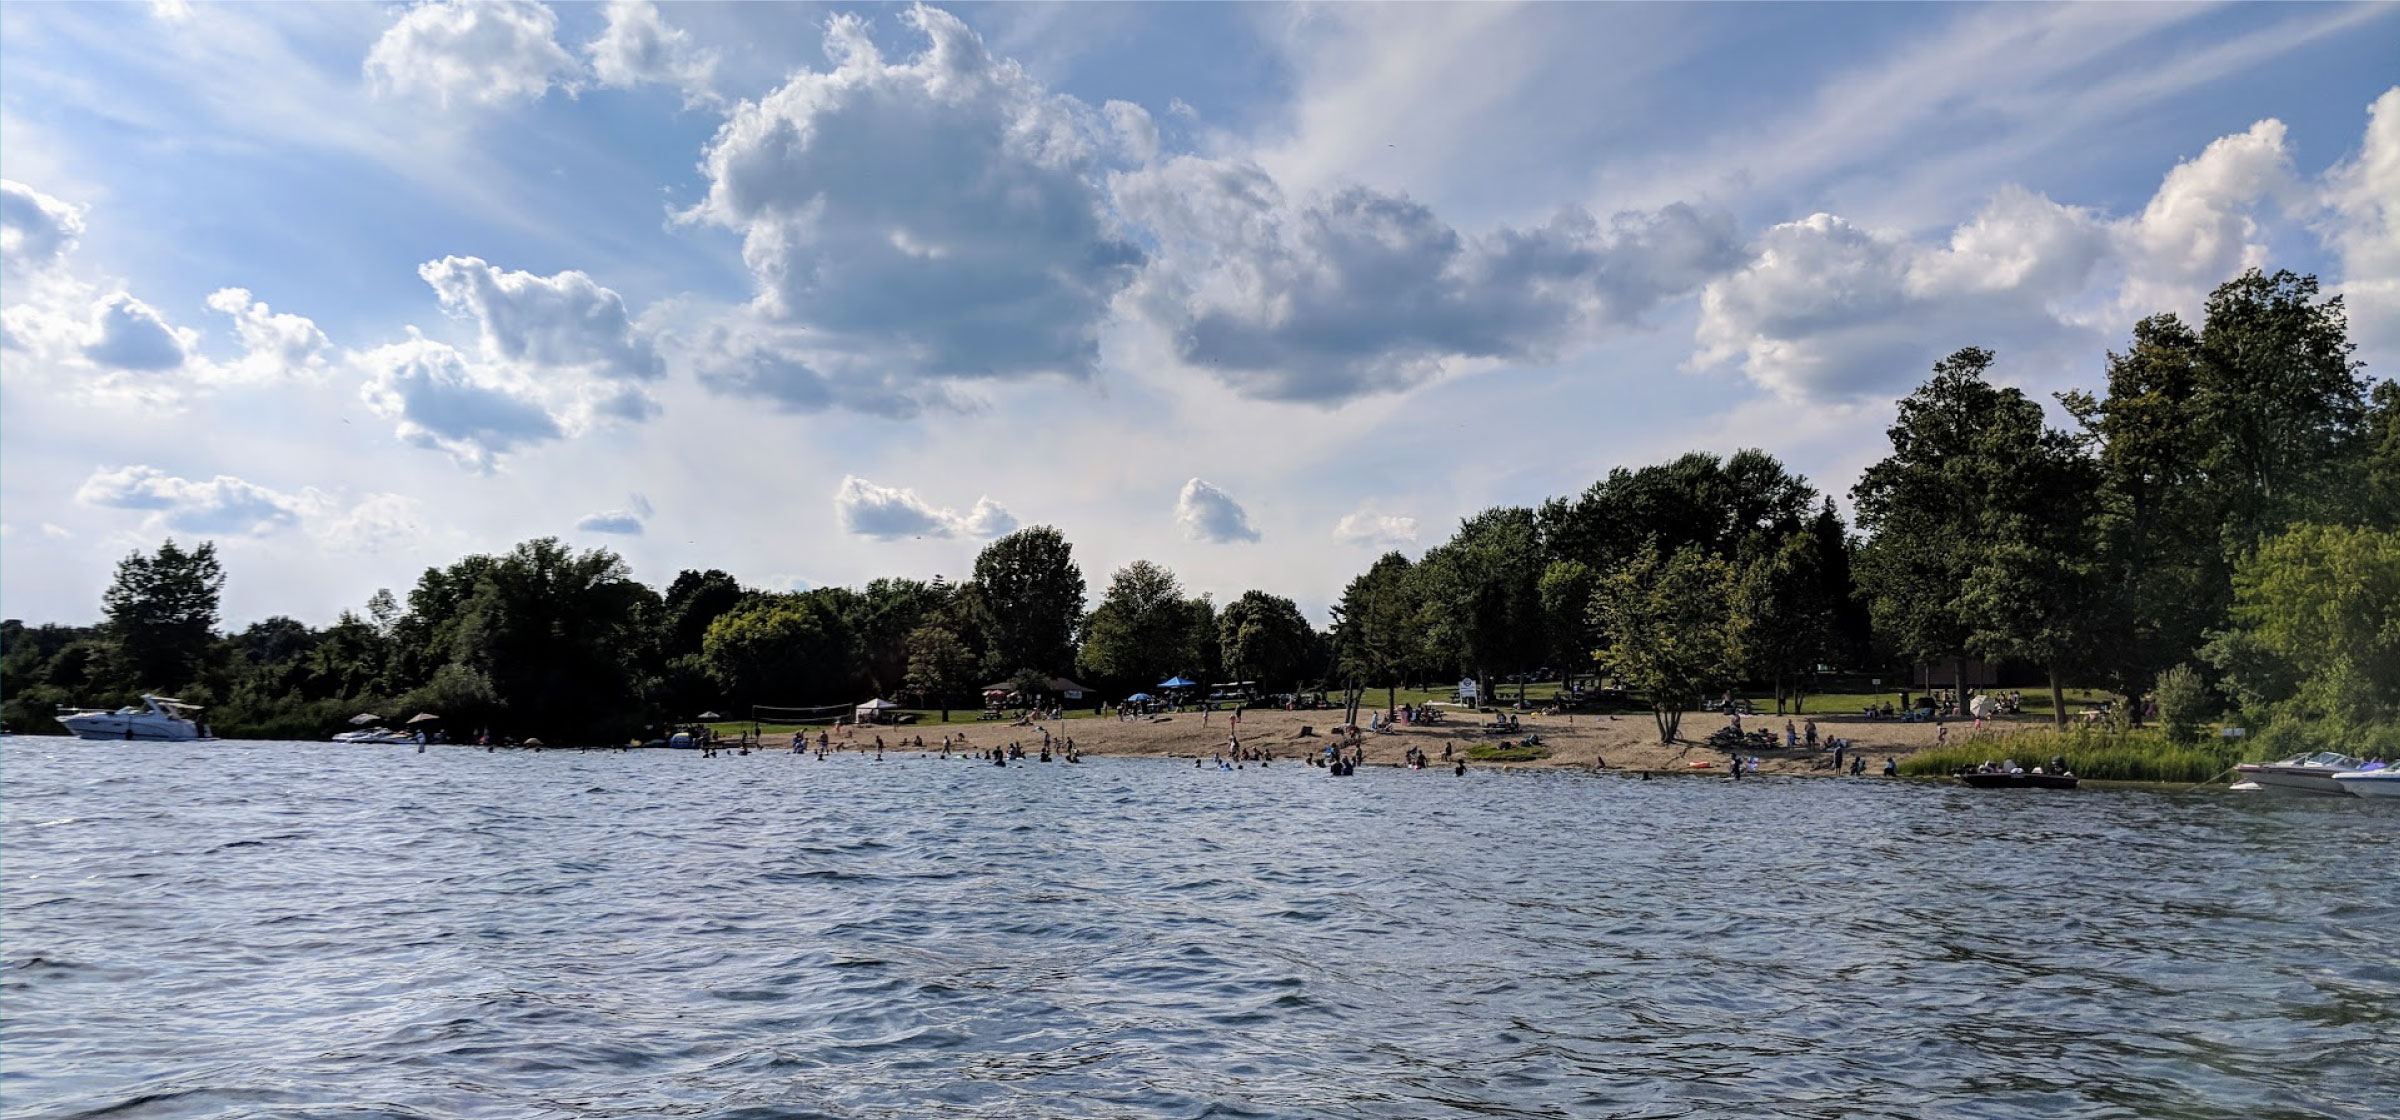 People swimming at a beach